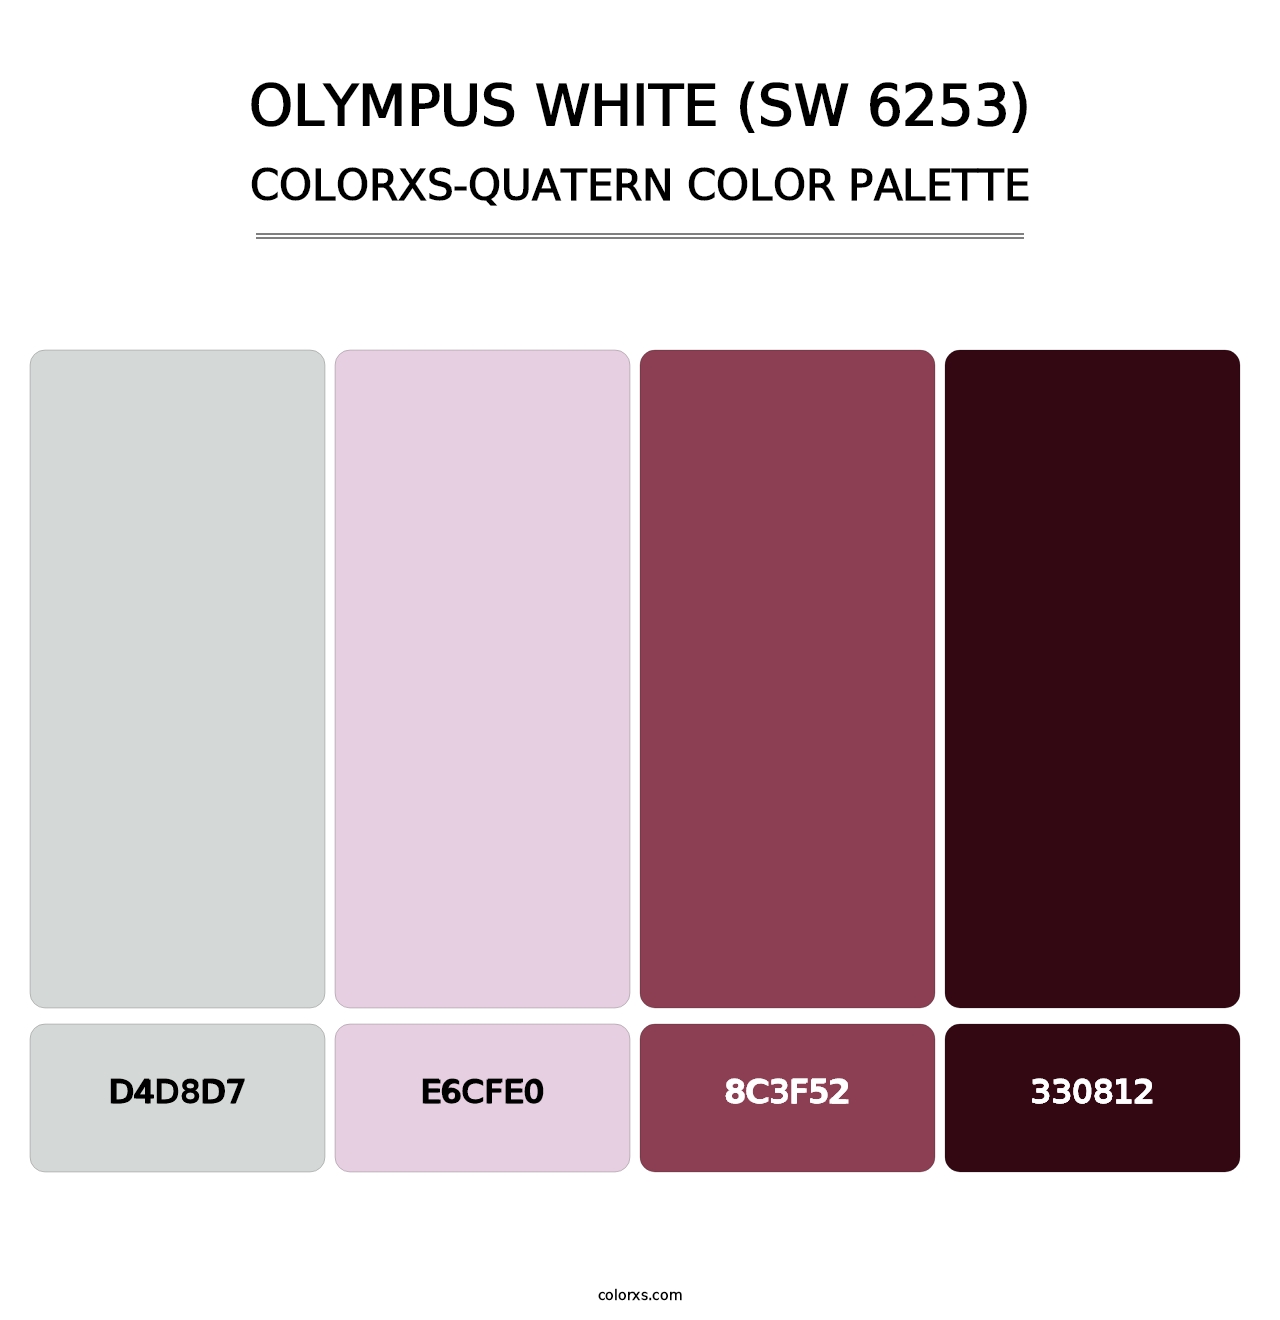 Olympus White (SW 6253) - Colorxs Quatern Palette